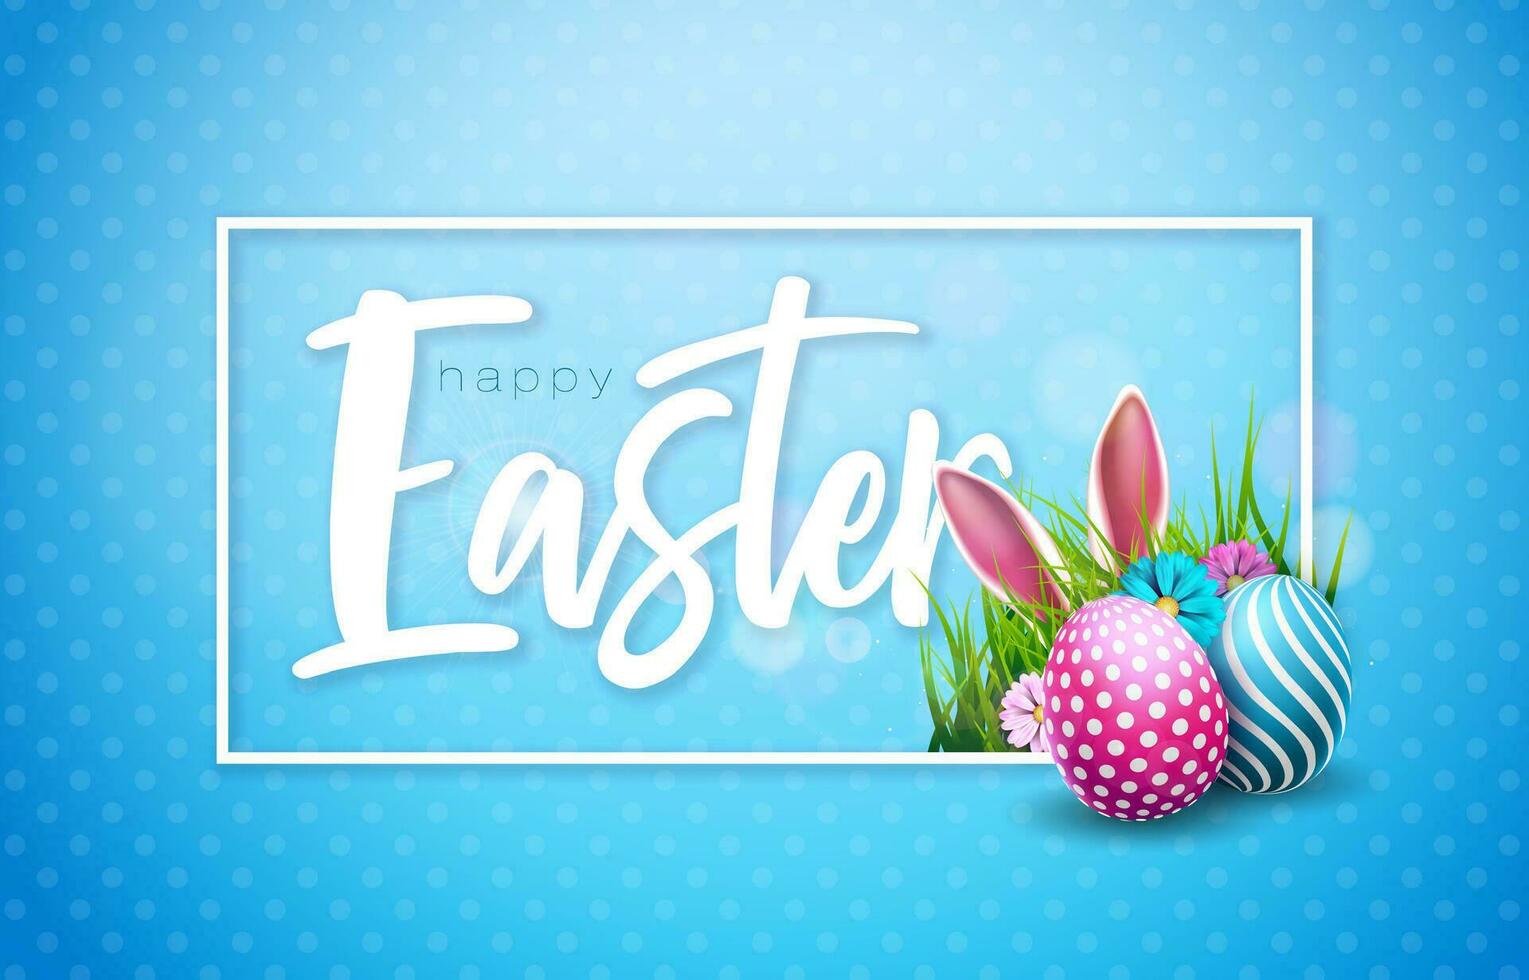 Vector Illustration of Happy Easter Holiday with Colorful Painted Egg and Rabbit Ears on Blue Background. International Celebration Design with Typography for Greeting Card, Party Invitation or Promo